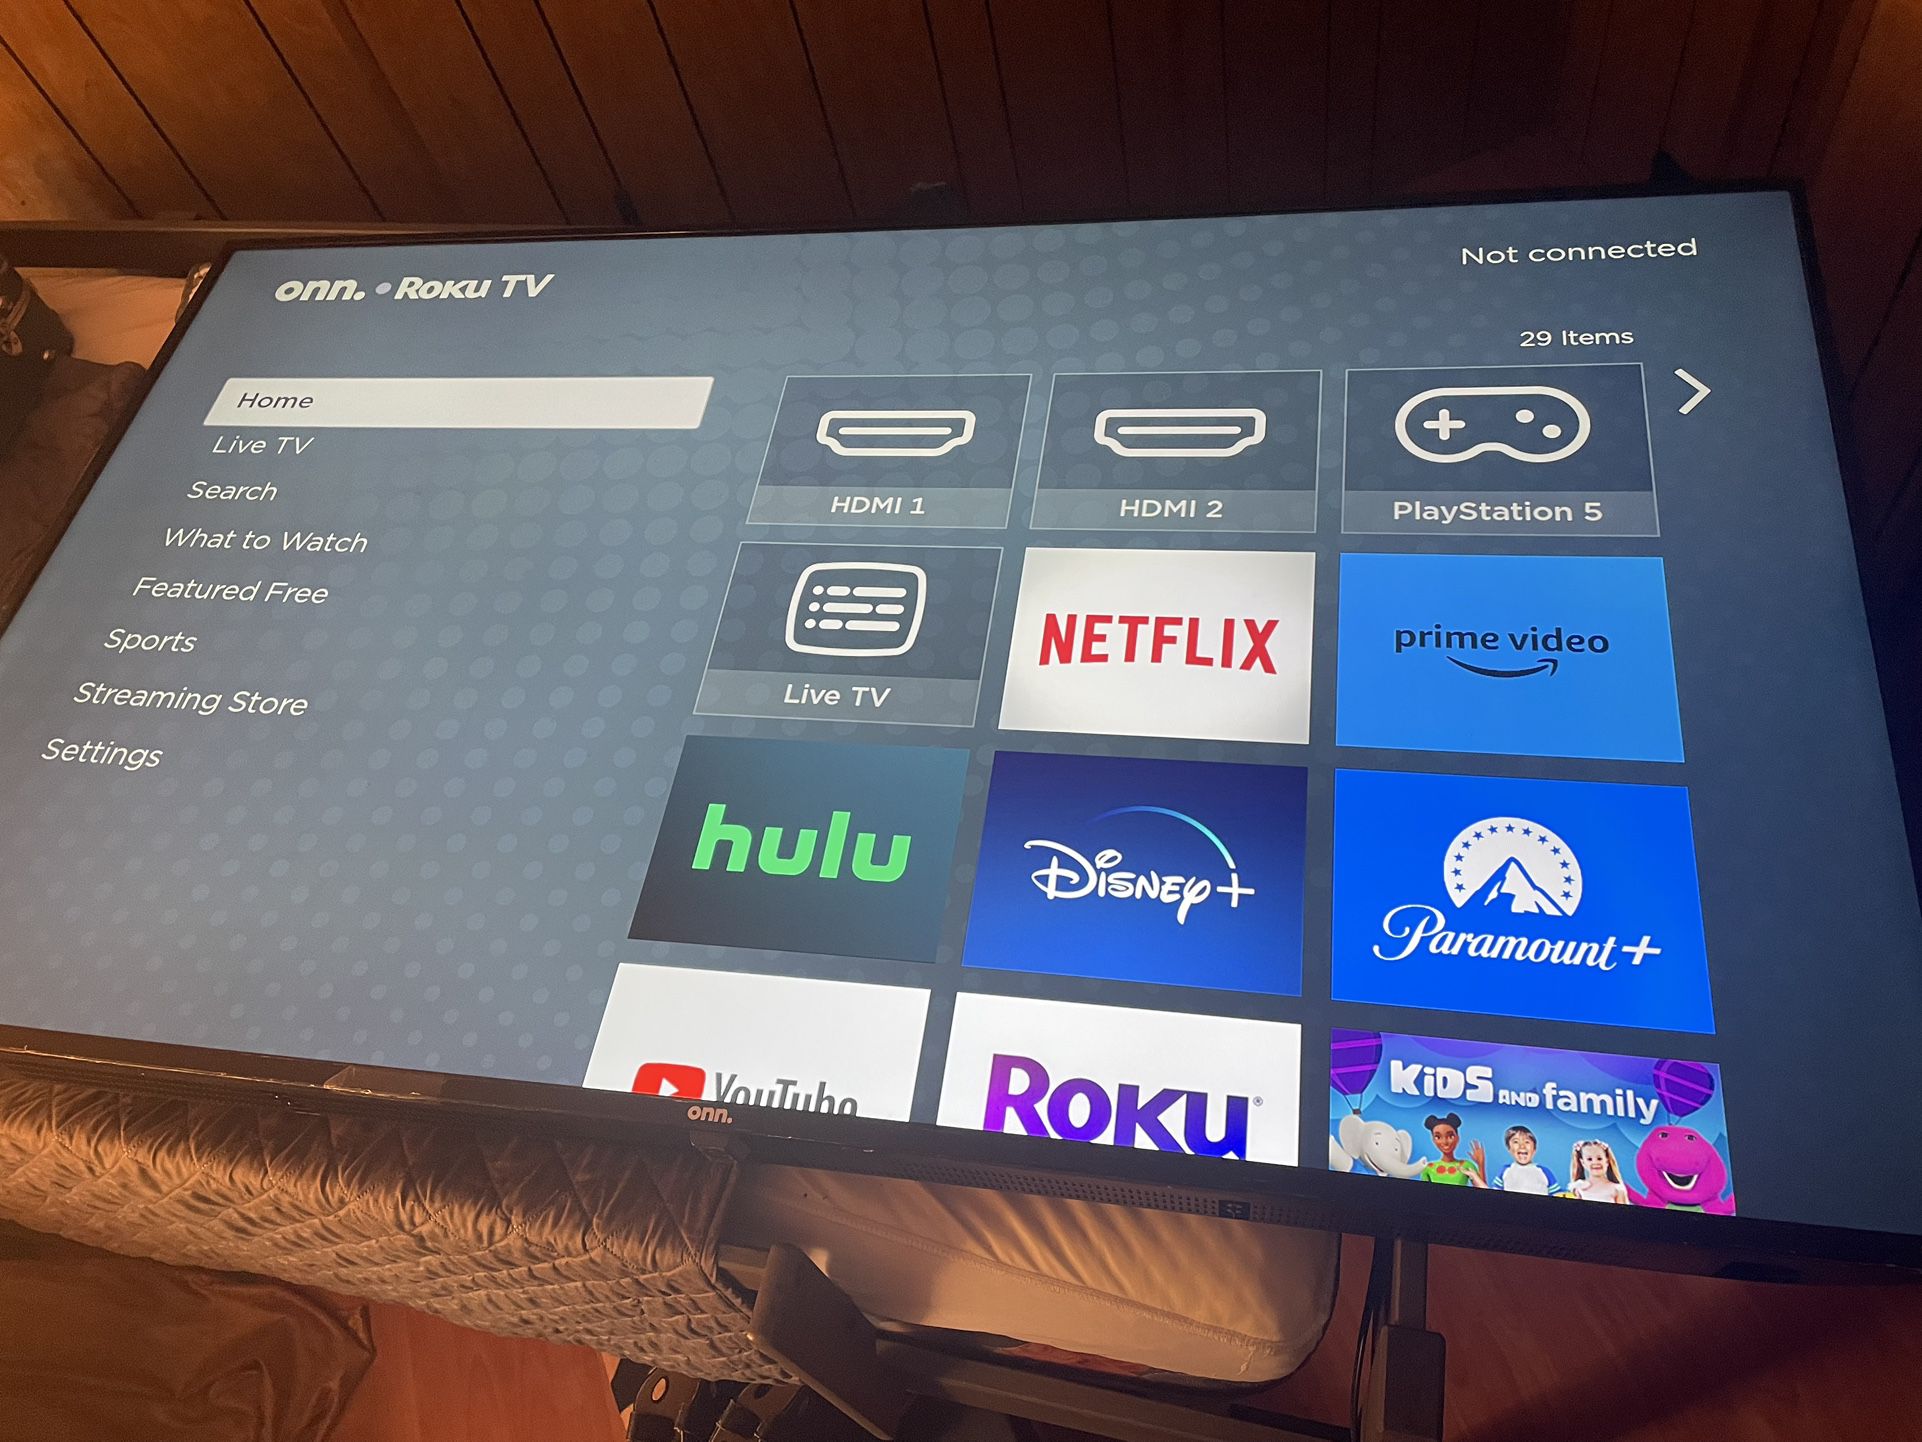 Onn Roku 60” Tv Pretty Much Brand New Just No Use For It Anymore Moving 